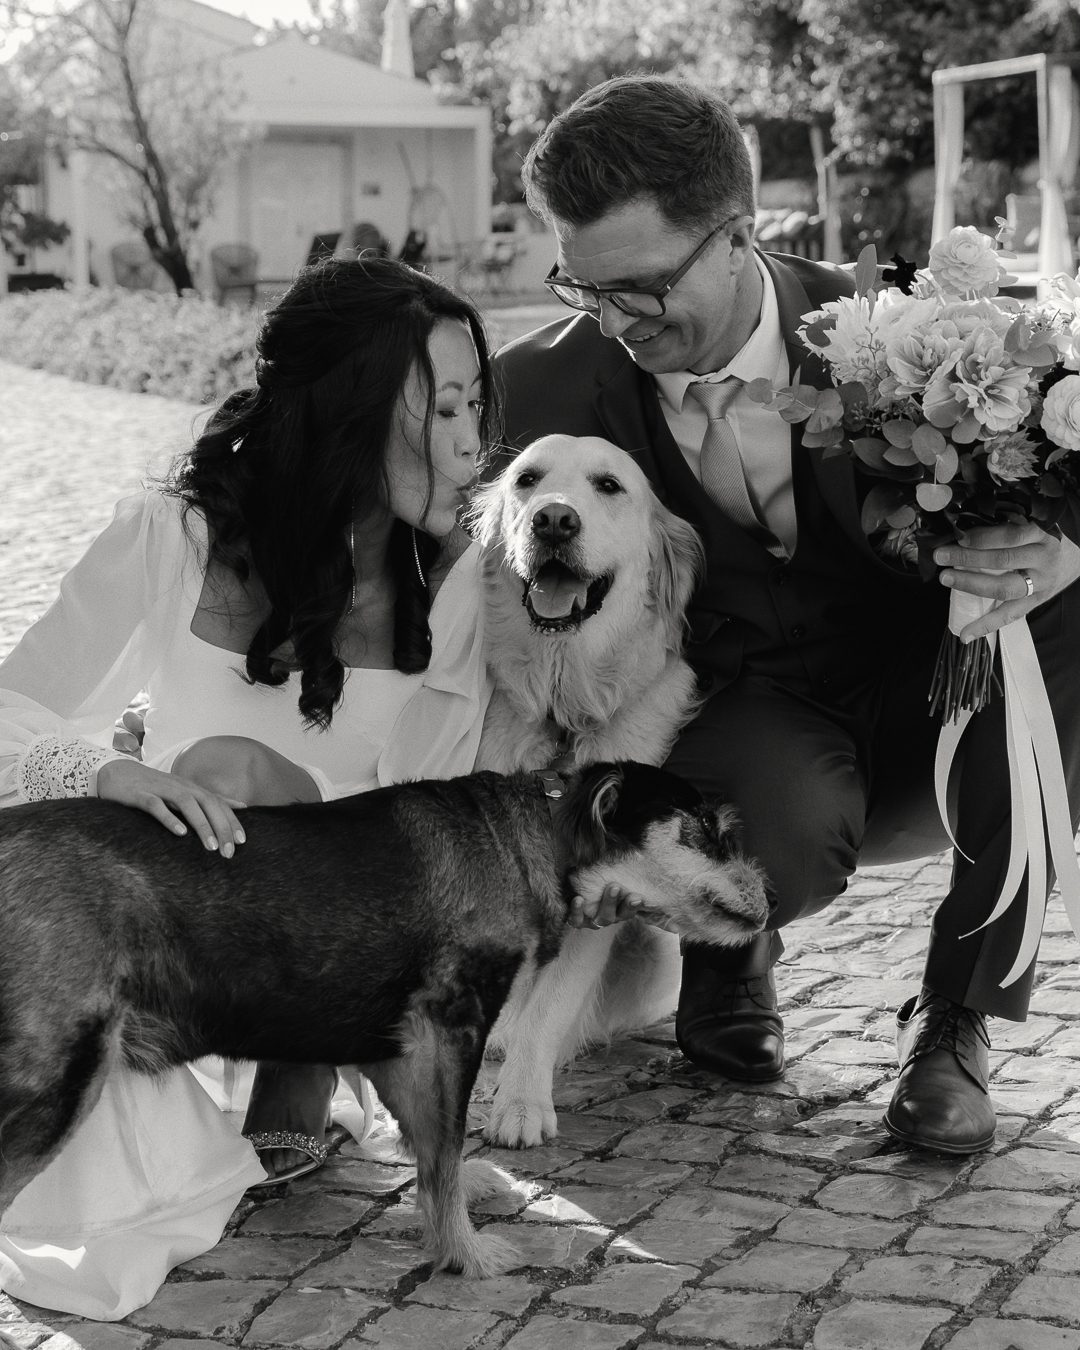 pets at weddings, Portugal wedding, wedding photogrpahy, wedding portraits, bride and groom with puppies